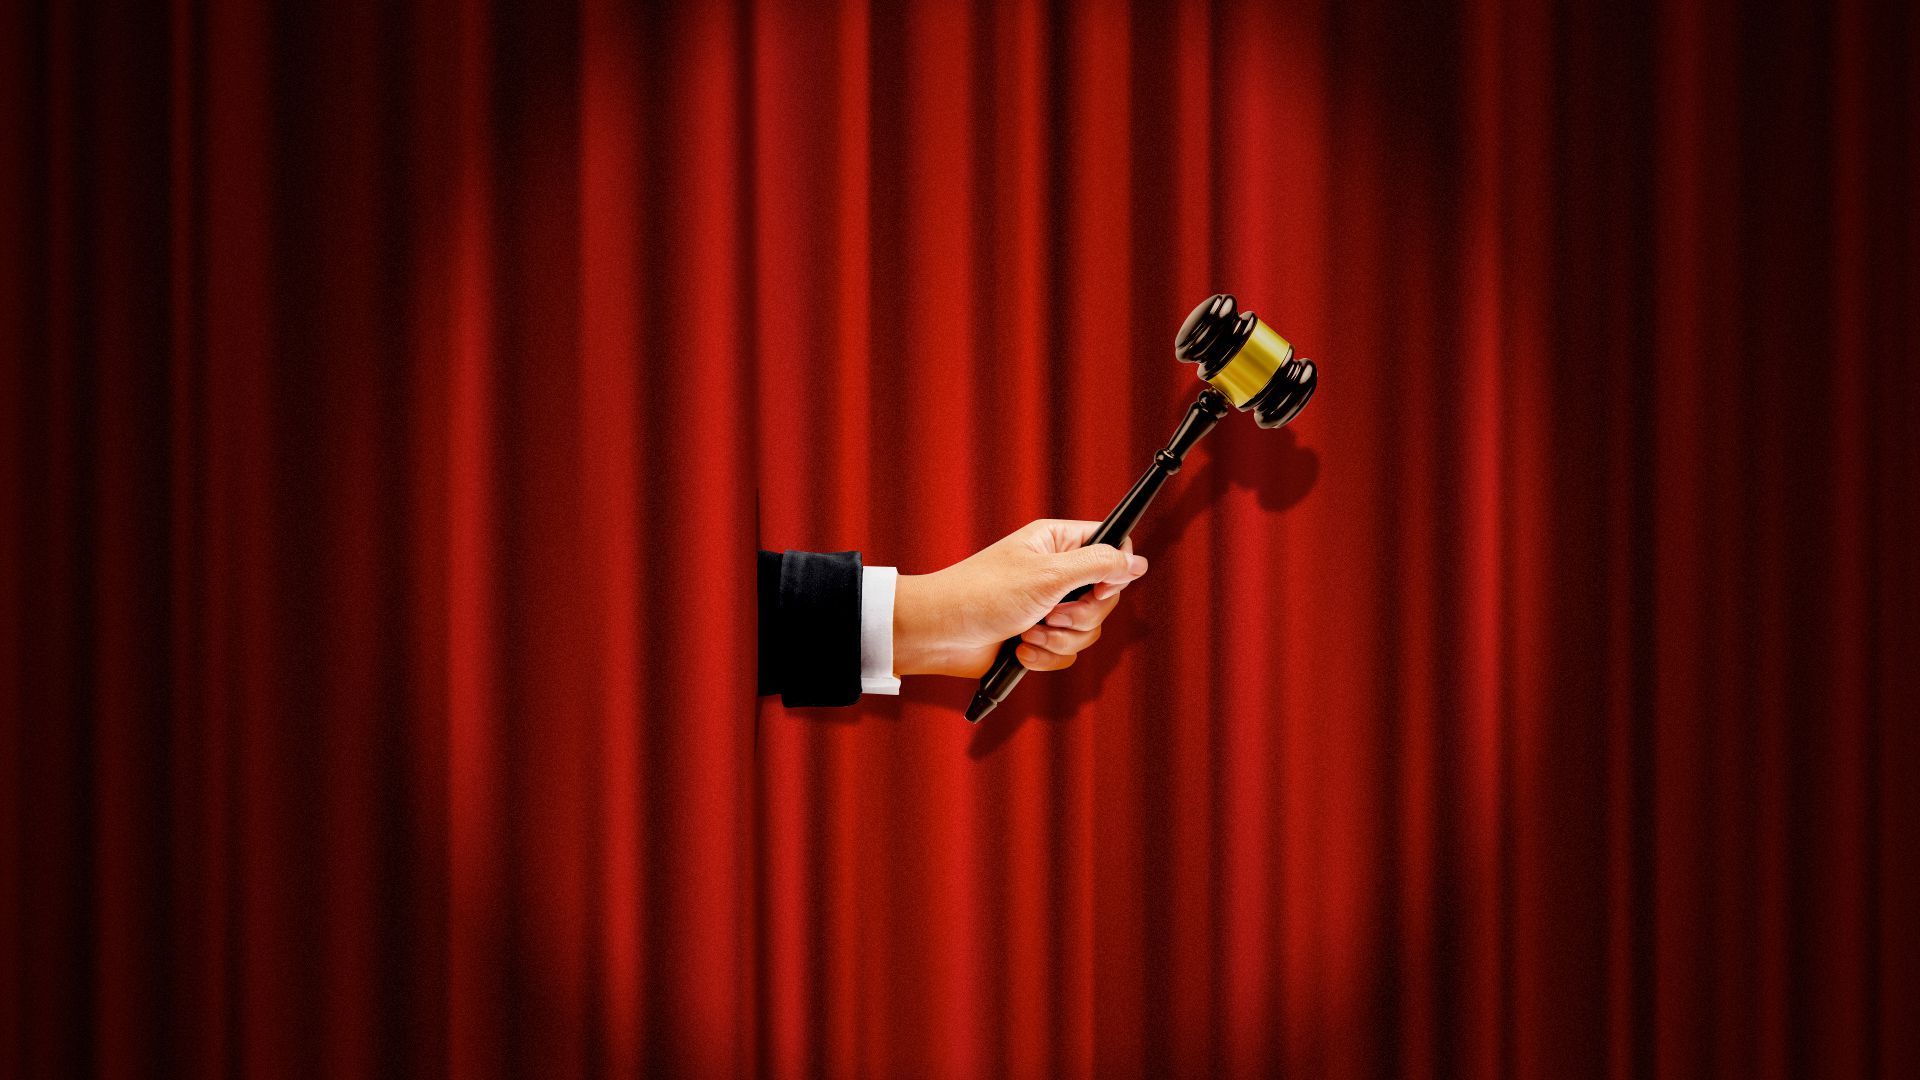 Illustration of a hand in a spotlight holding a gavel out from behind a red curtain. 